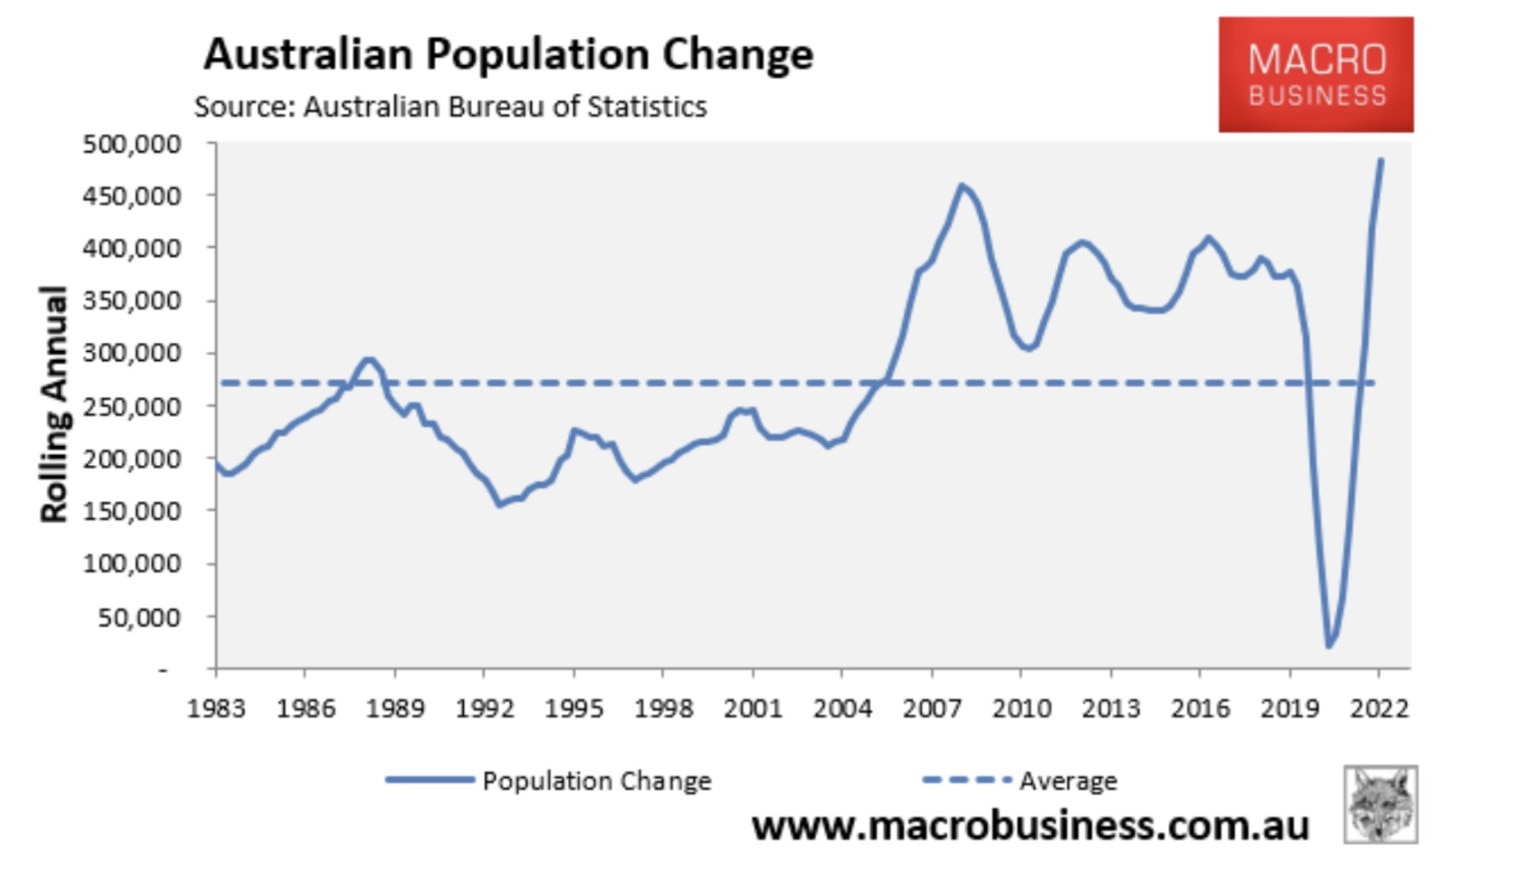 Australia’s population grew by an highest 482,000 in 2022